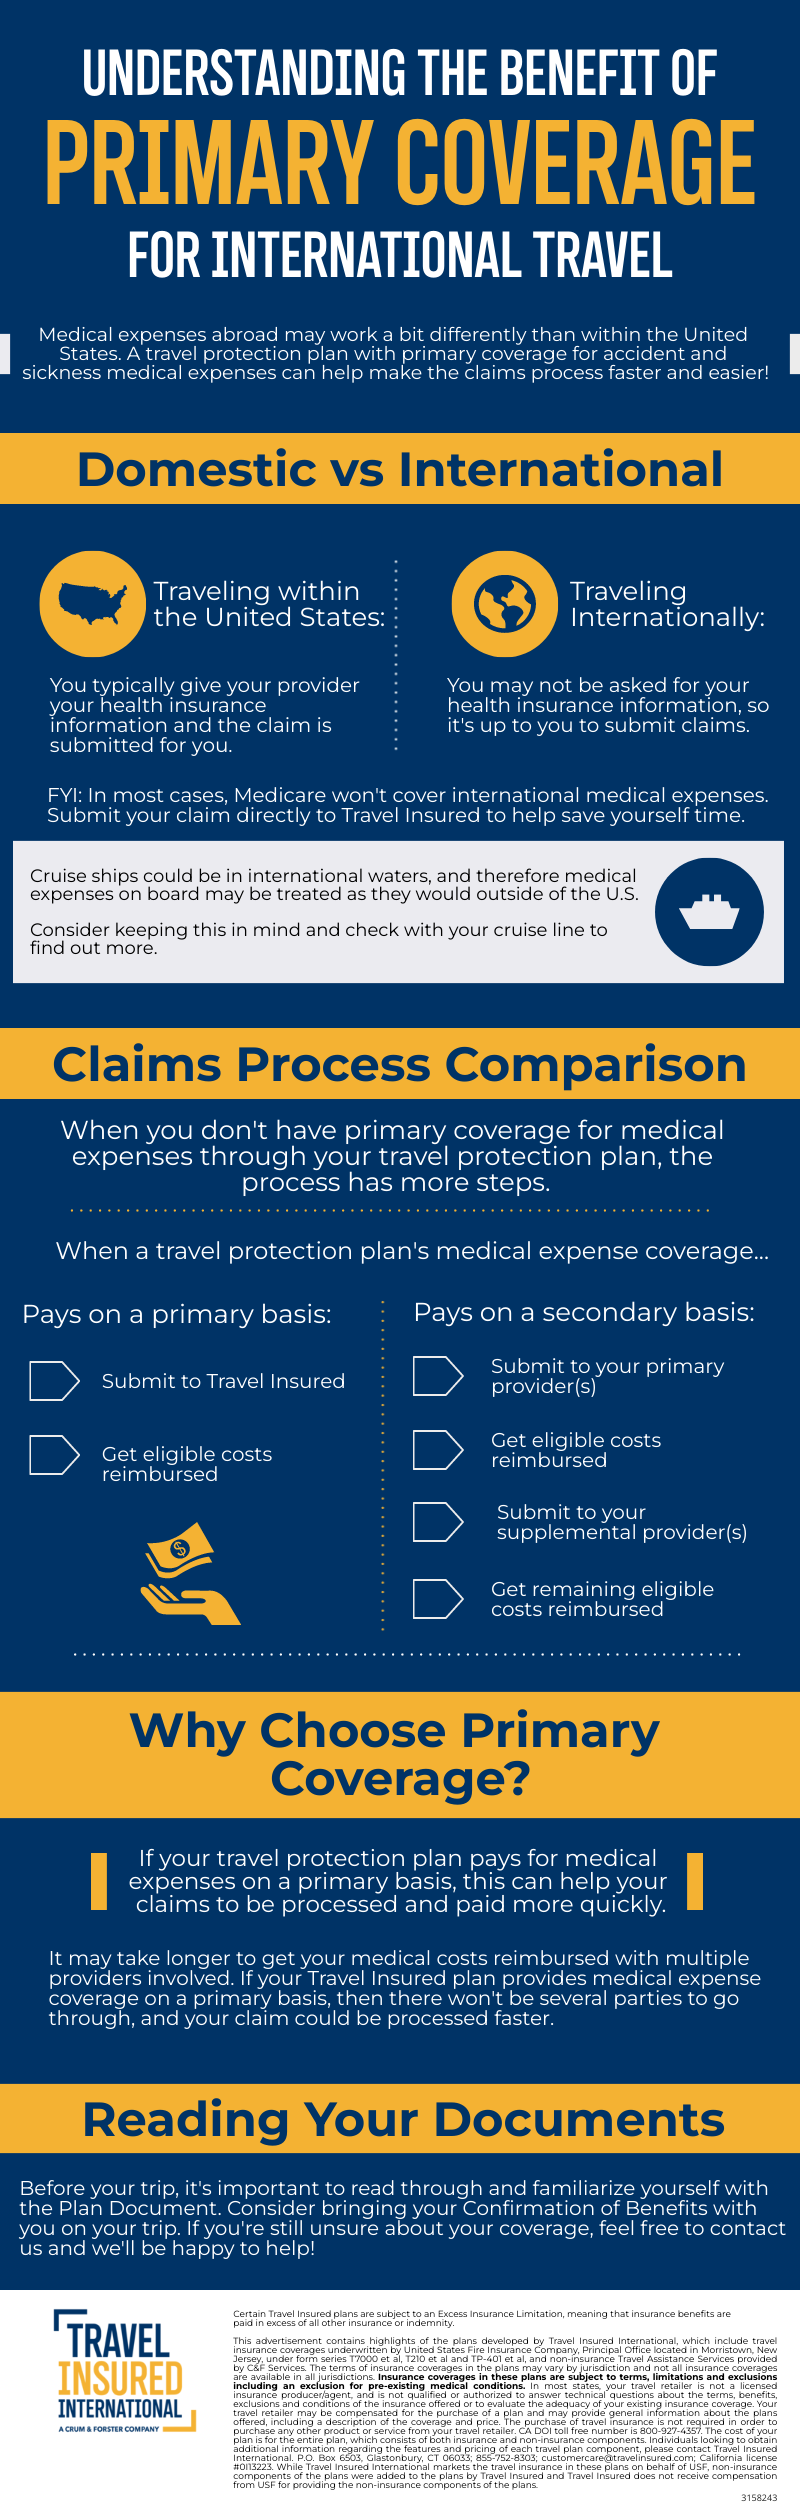 Understanding the Benefit of Primary Coverage for International Travel